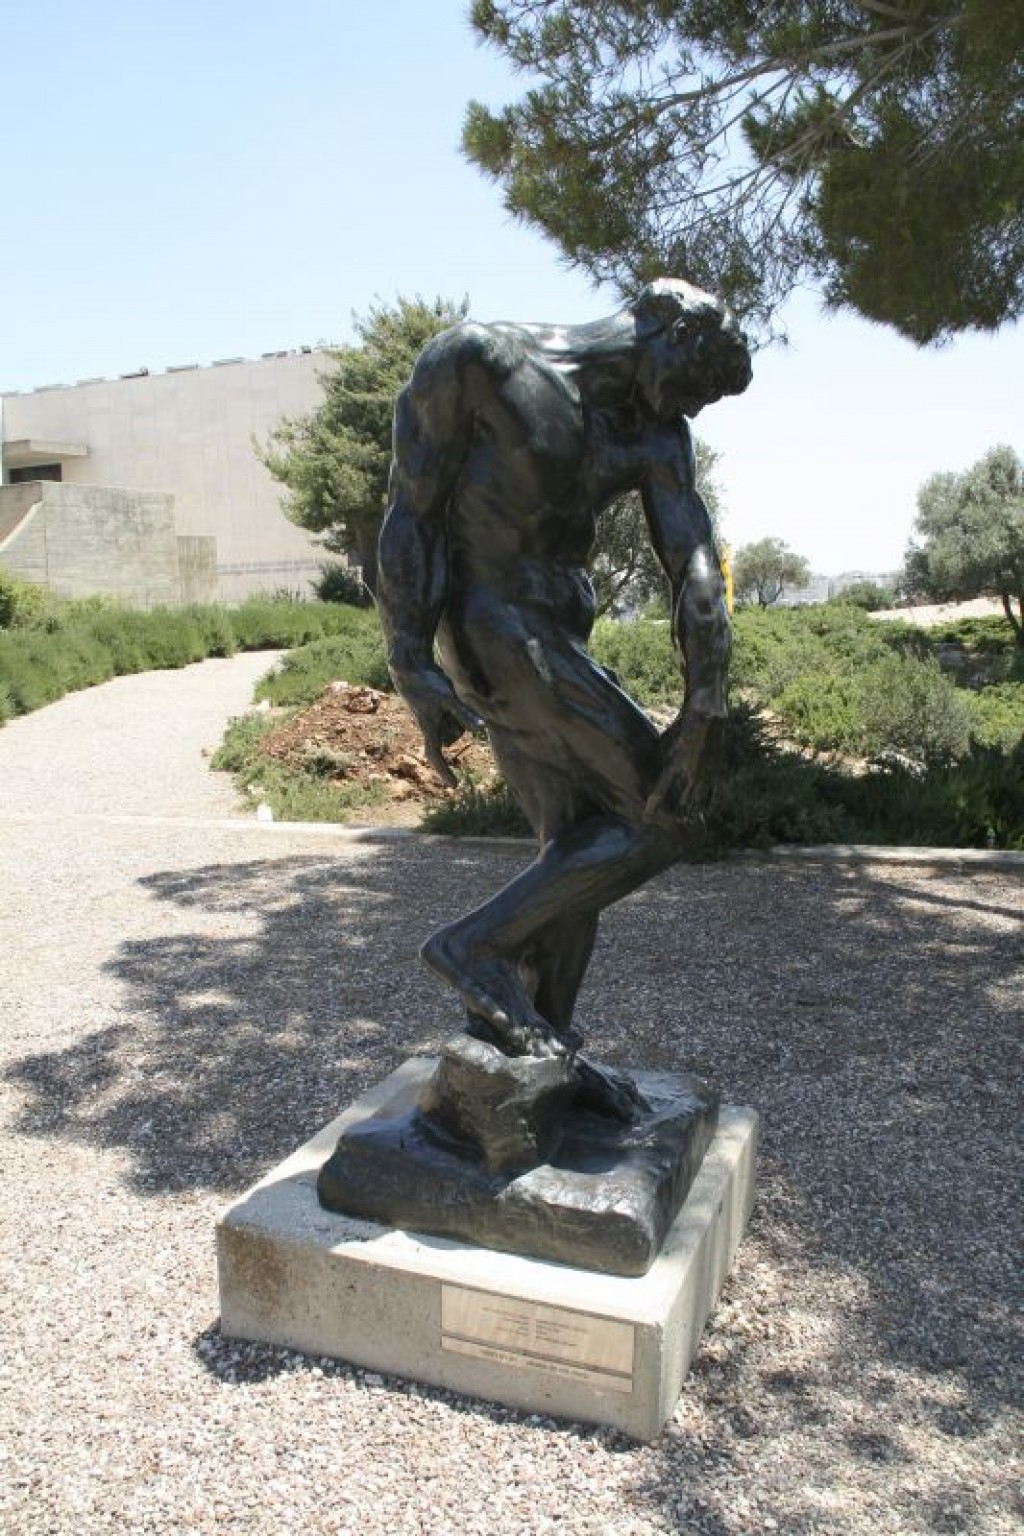 Pictures of Israel: Rodin statue in the garden of the Israel Museum